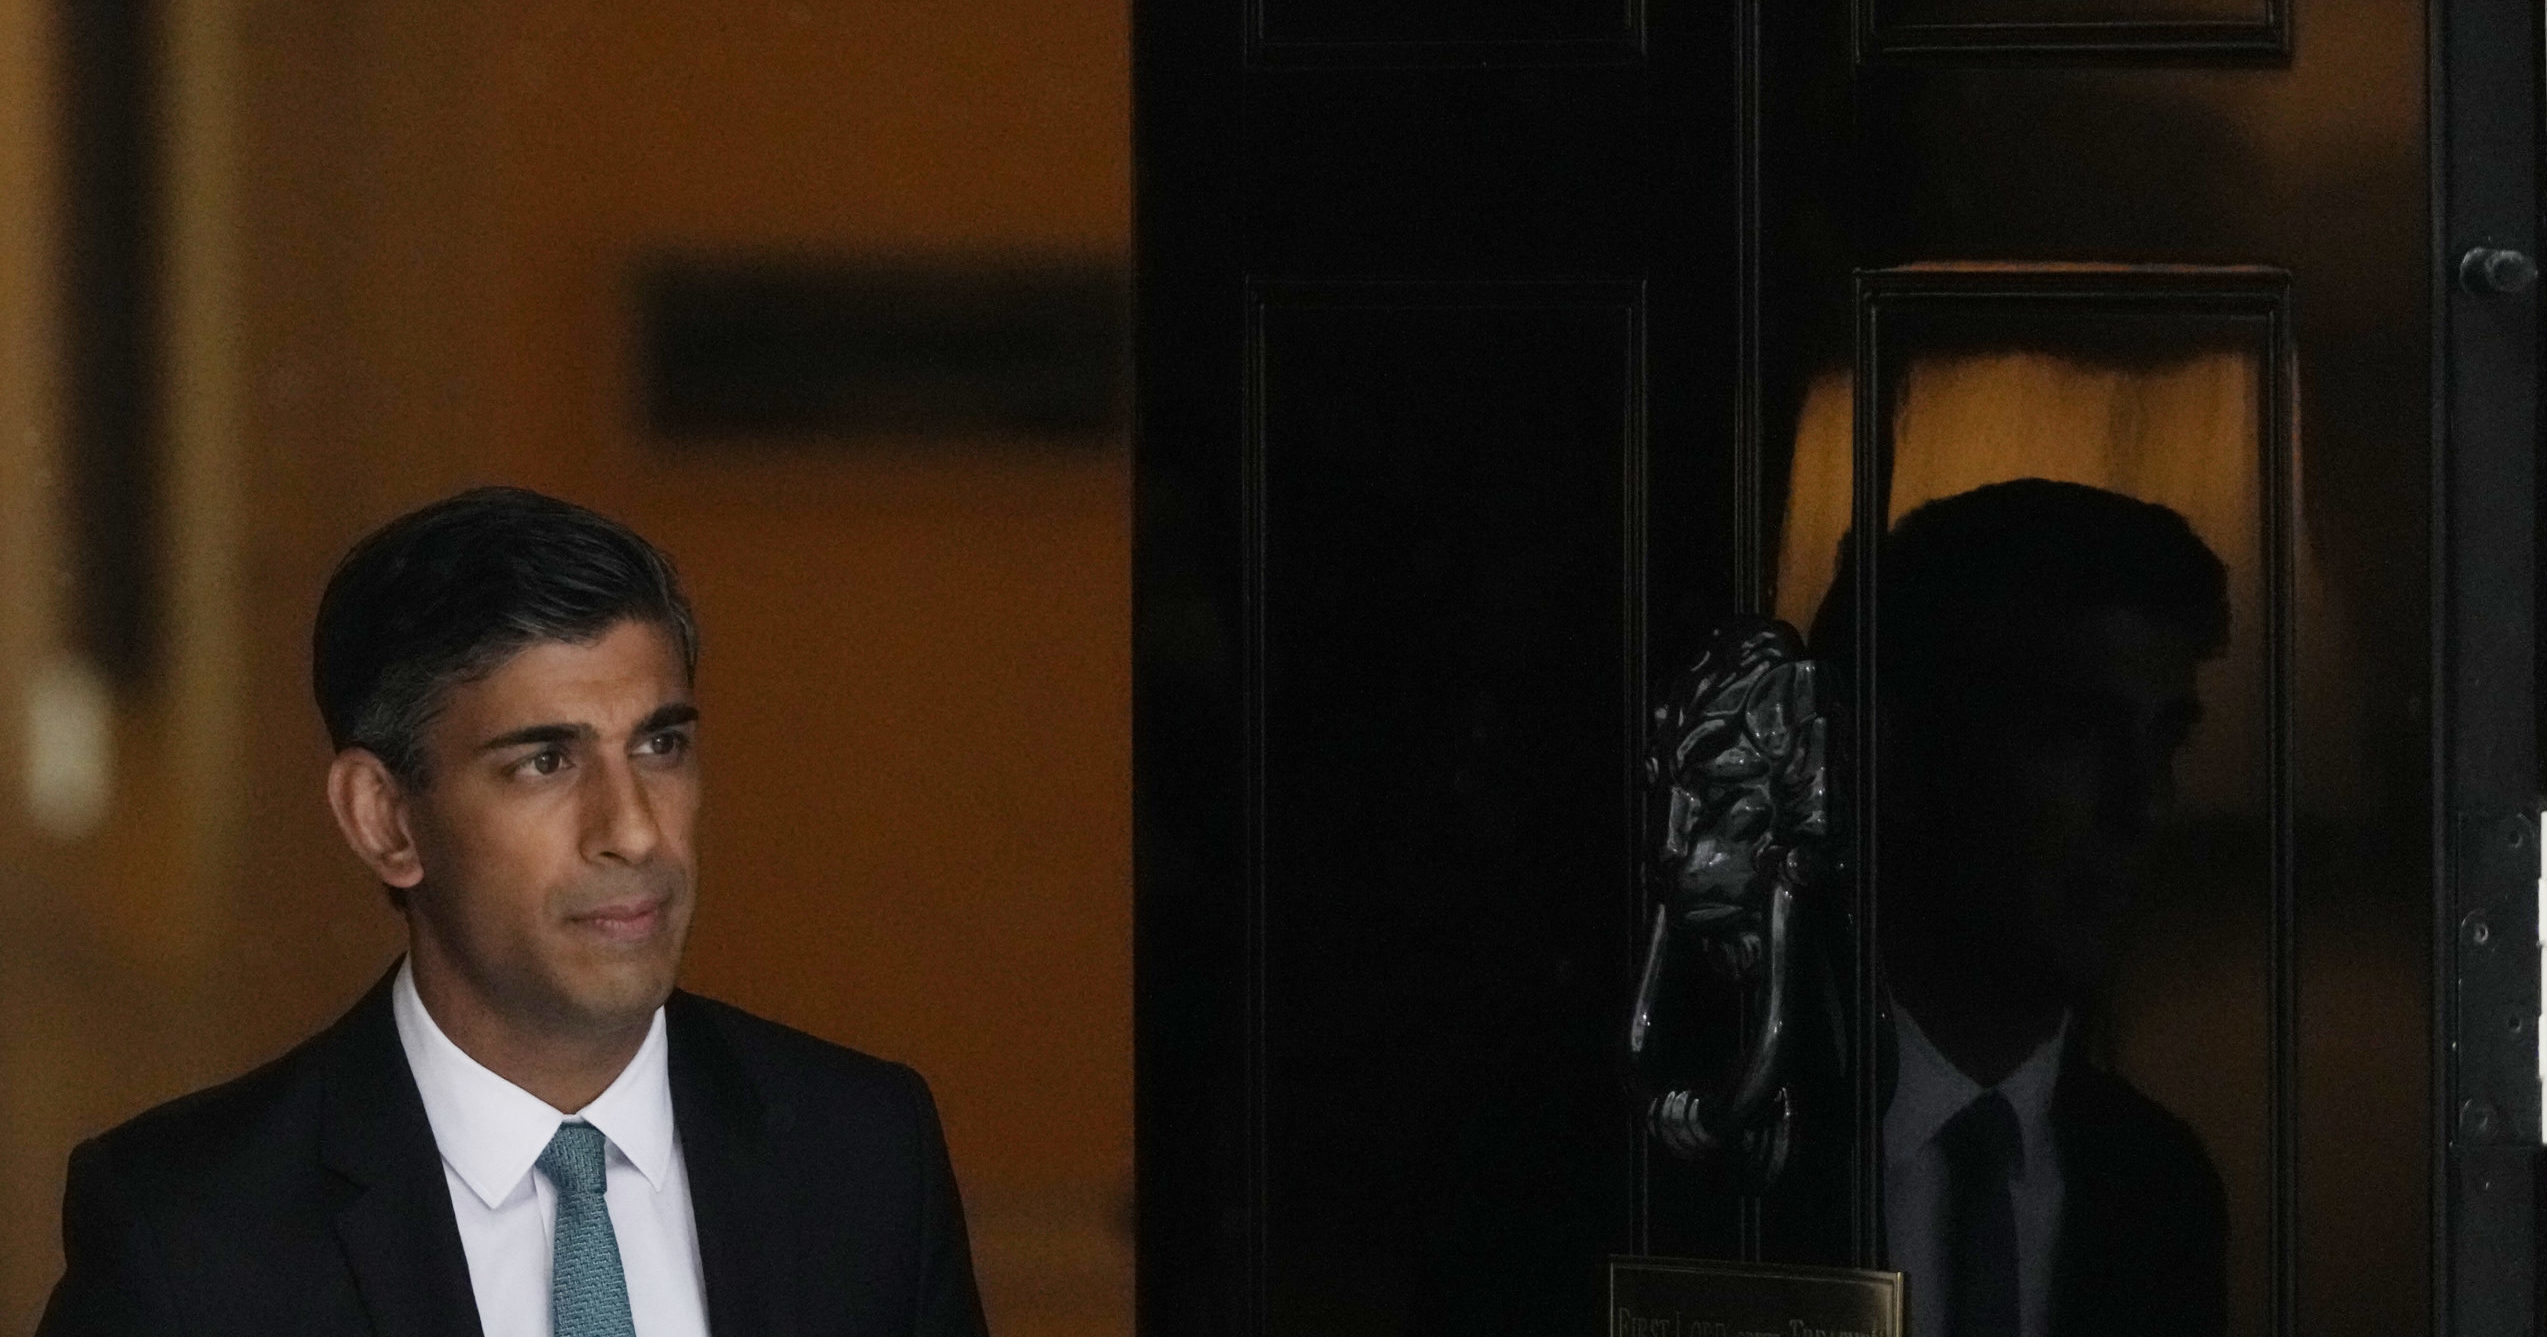 British Prime Minister Rishi Sunak leaves 10 Downing St. for the House of Commons for his first Prime Minister's Questions in London on Wednesday.